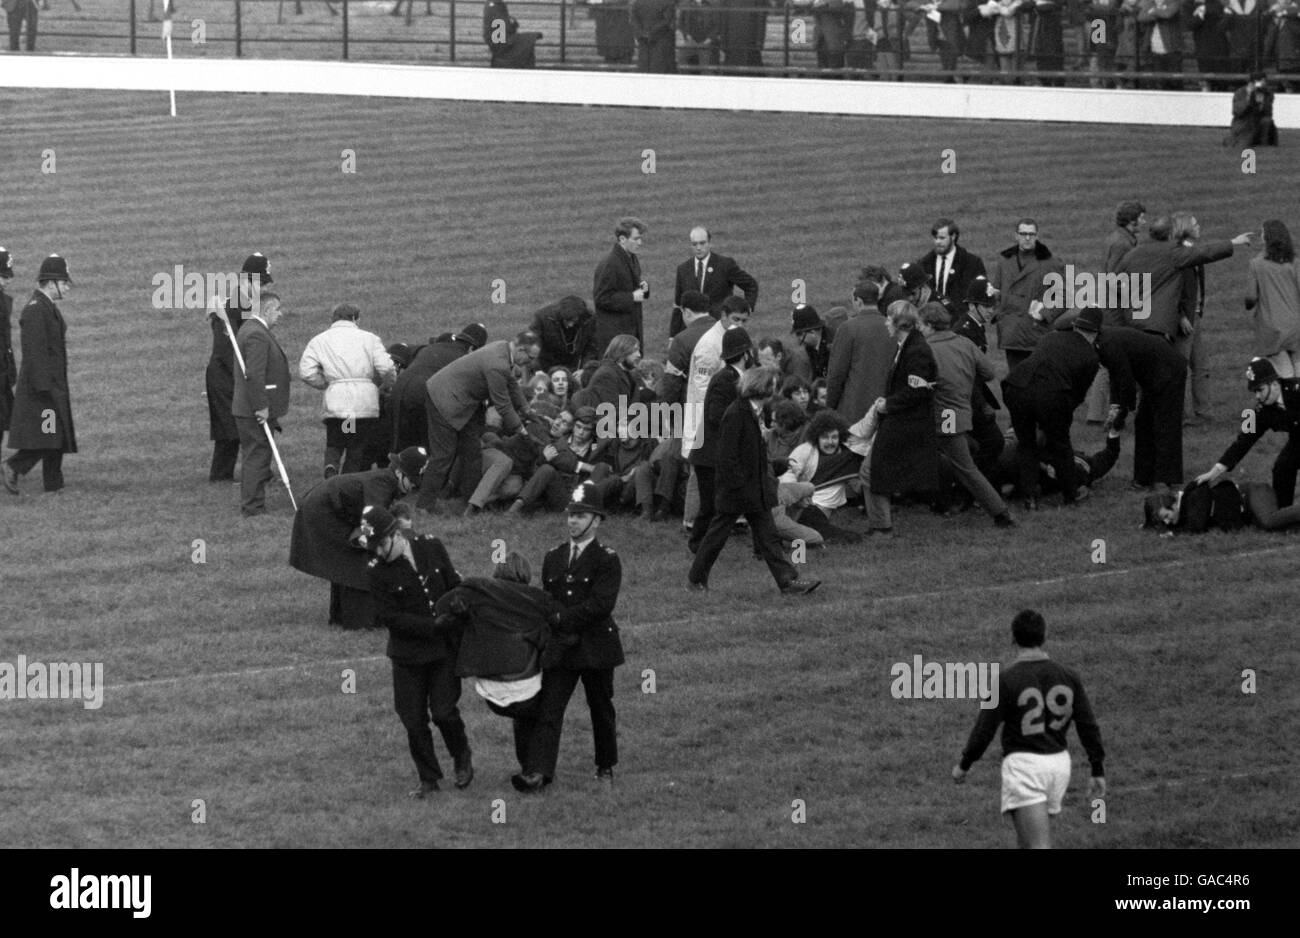 Anti-apartheid demonstrators stage a sit-down protest on the Twickenham pitch in order to halt play as policemen and RFU officials try to forcibly remove them Stock Photo